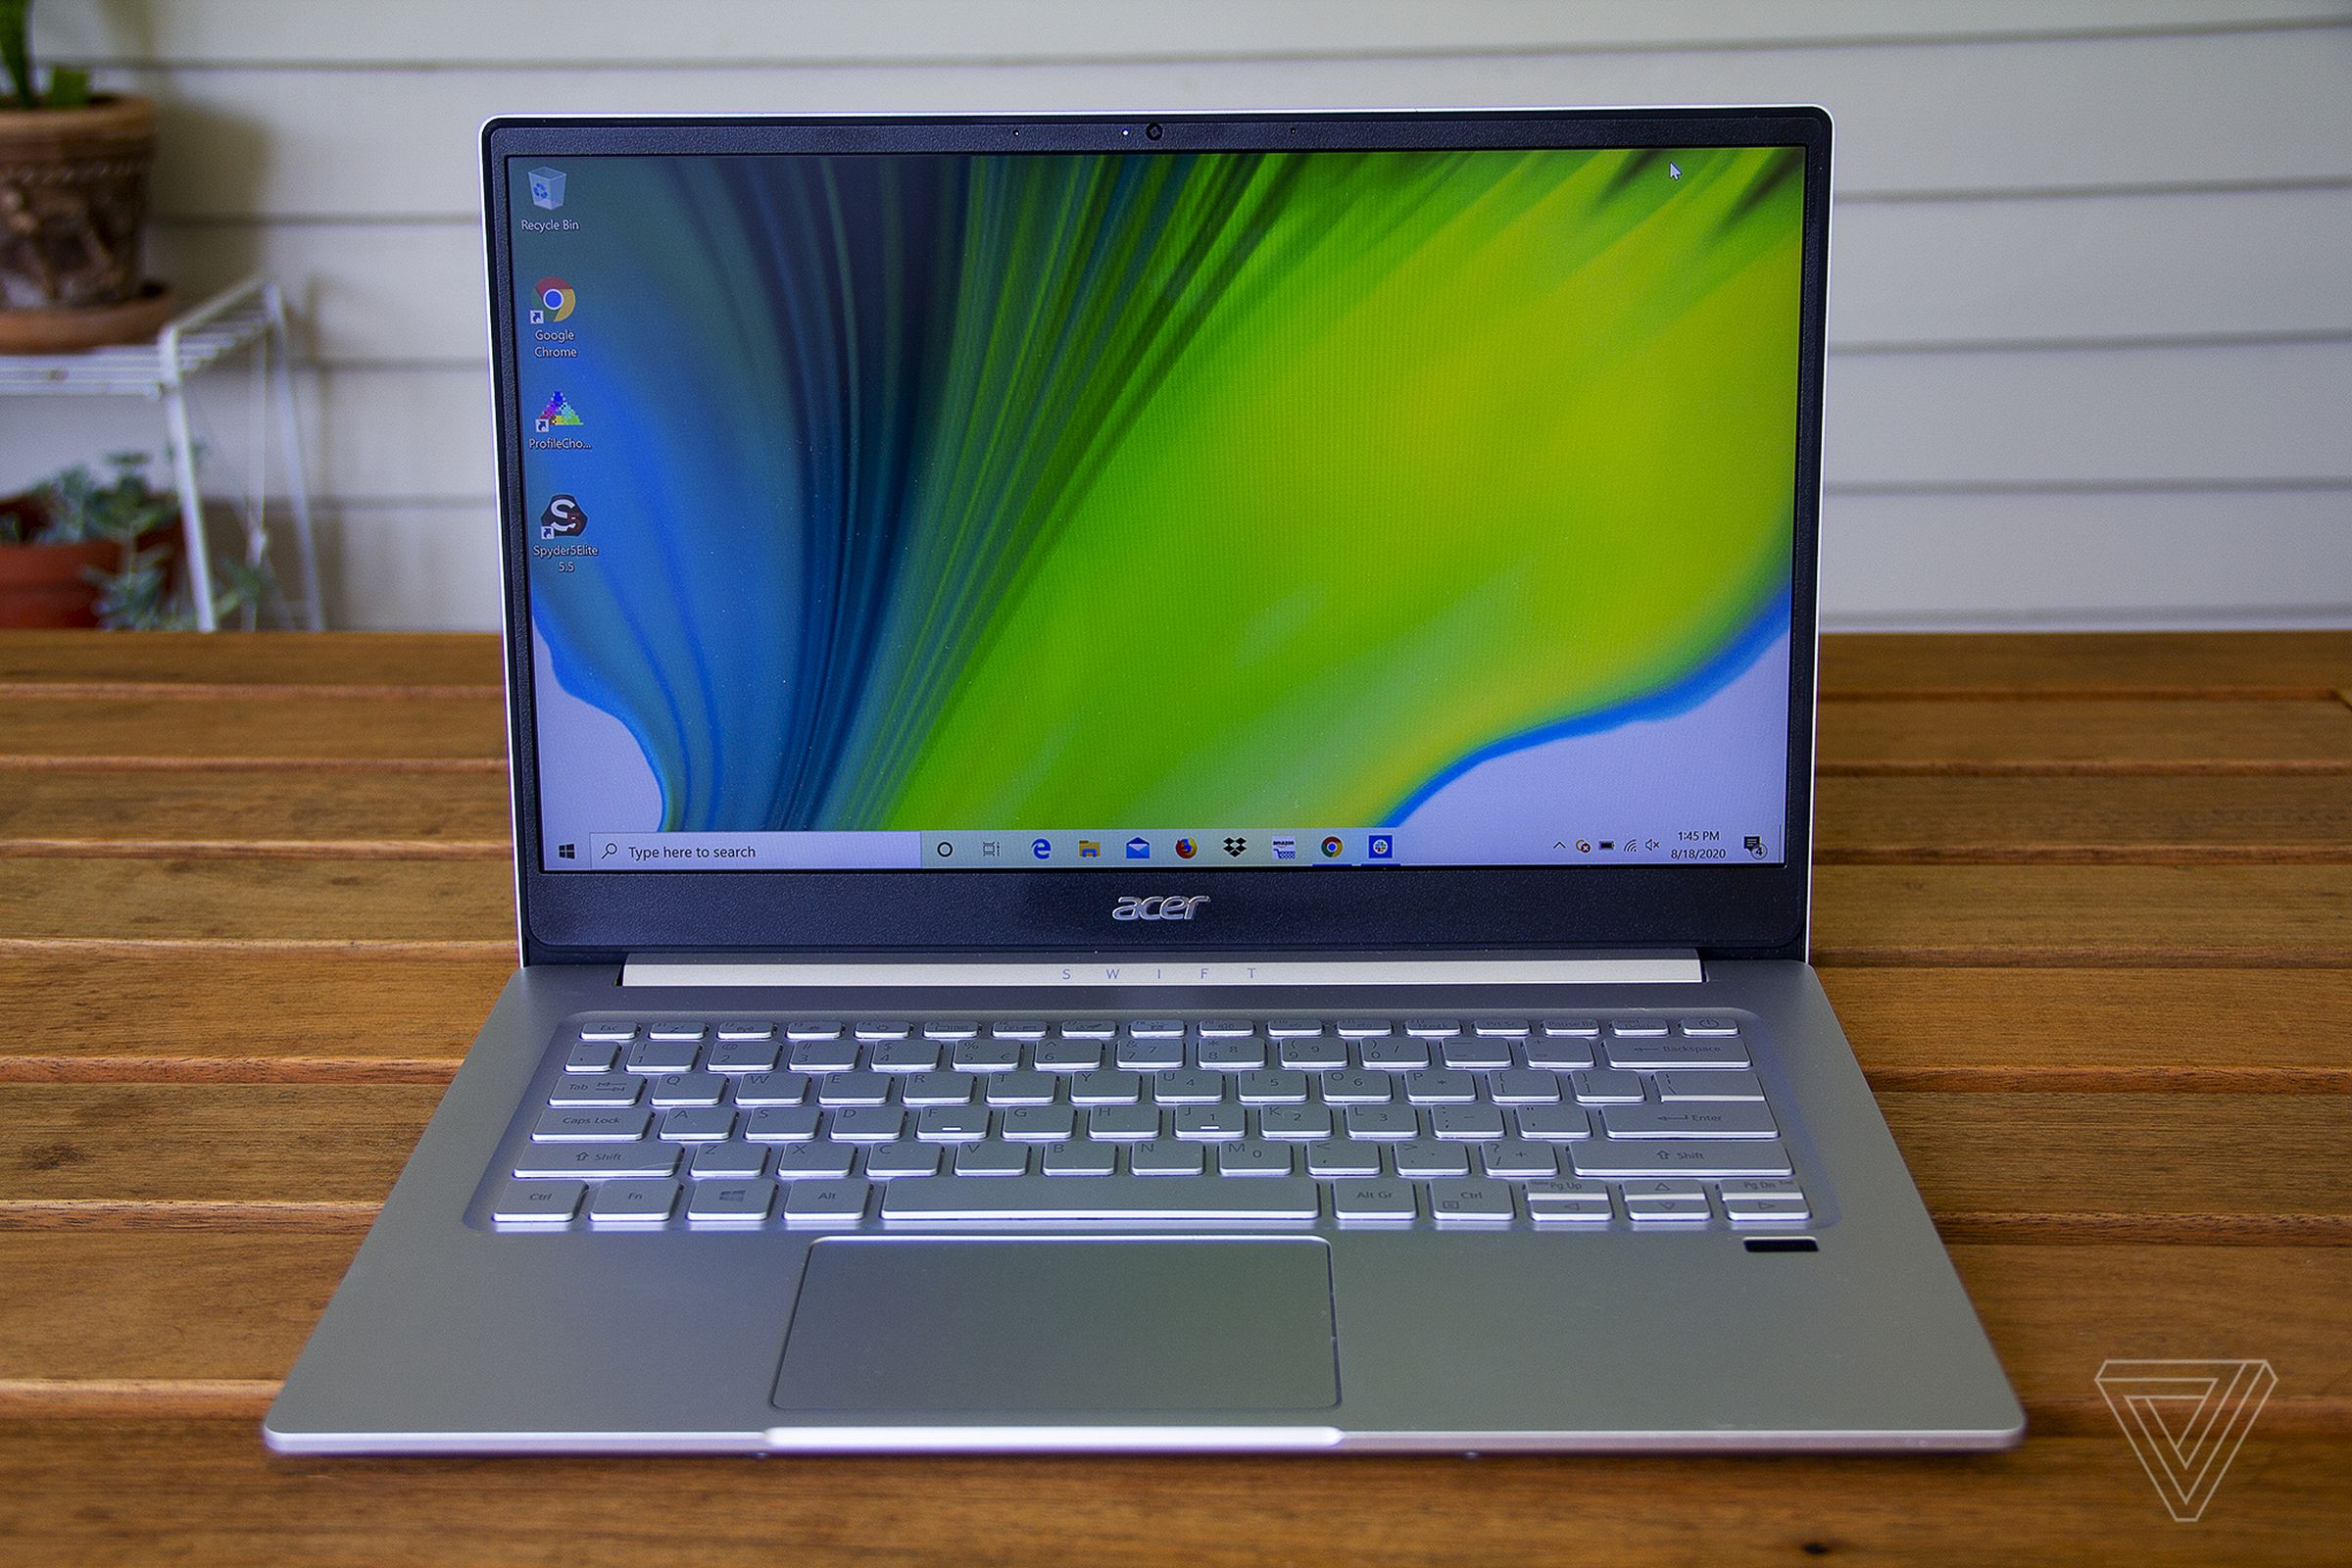 The Acer Swift 3 from the front.